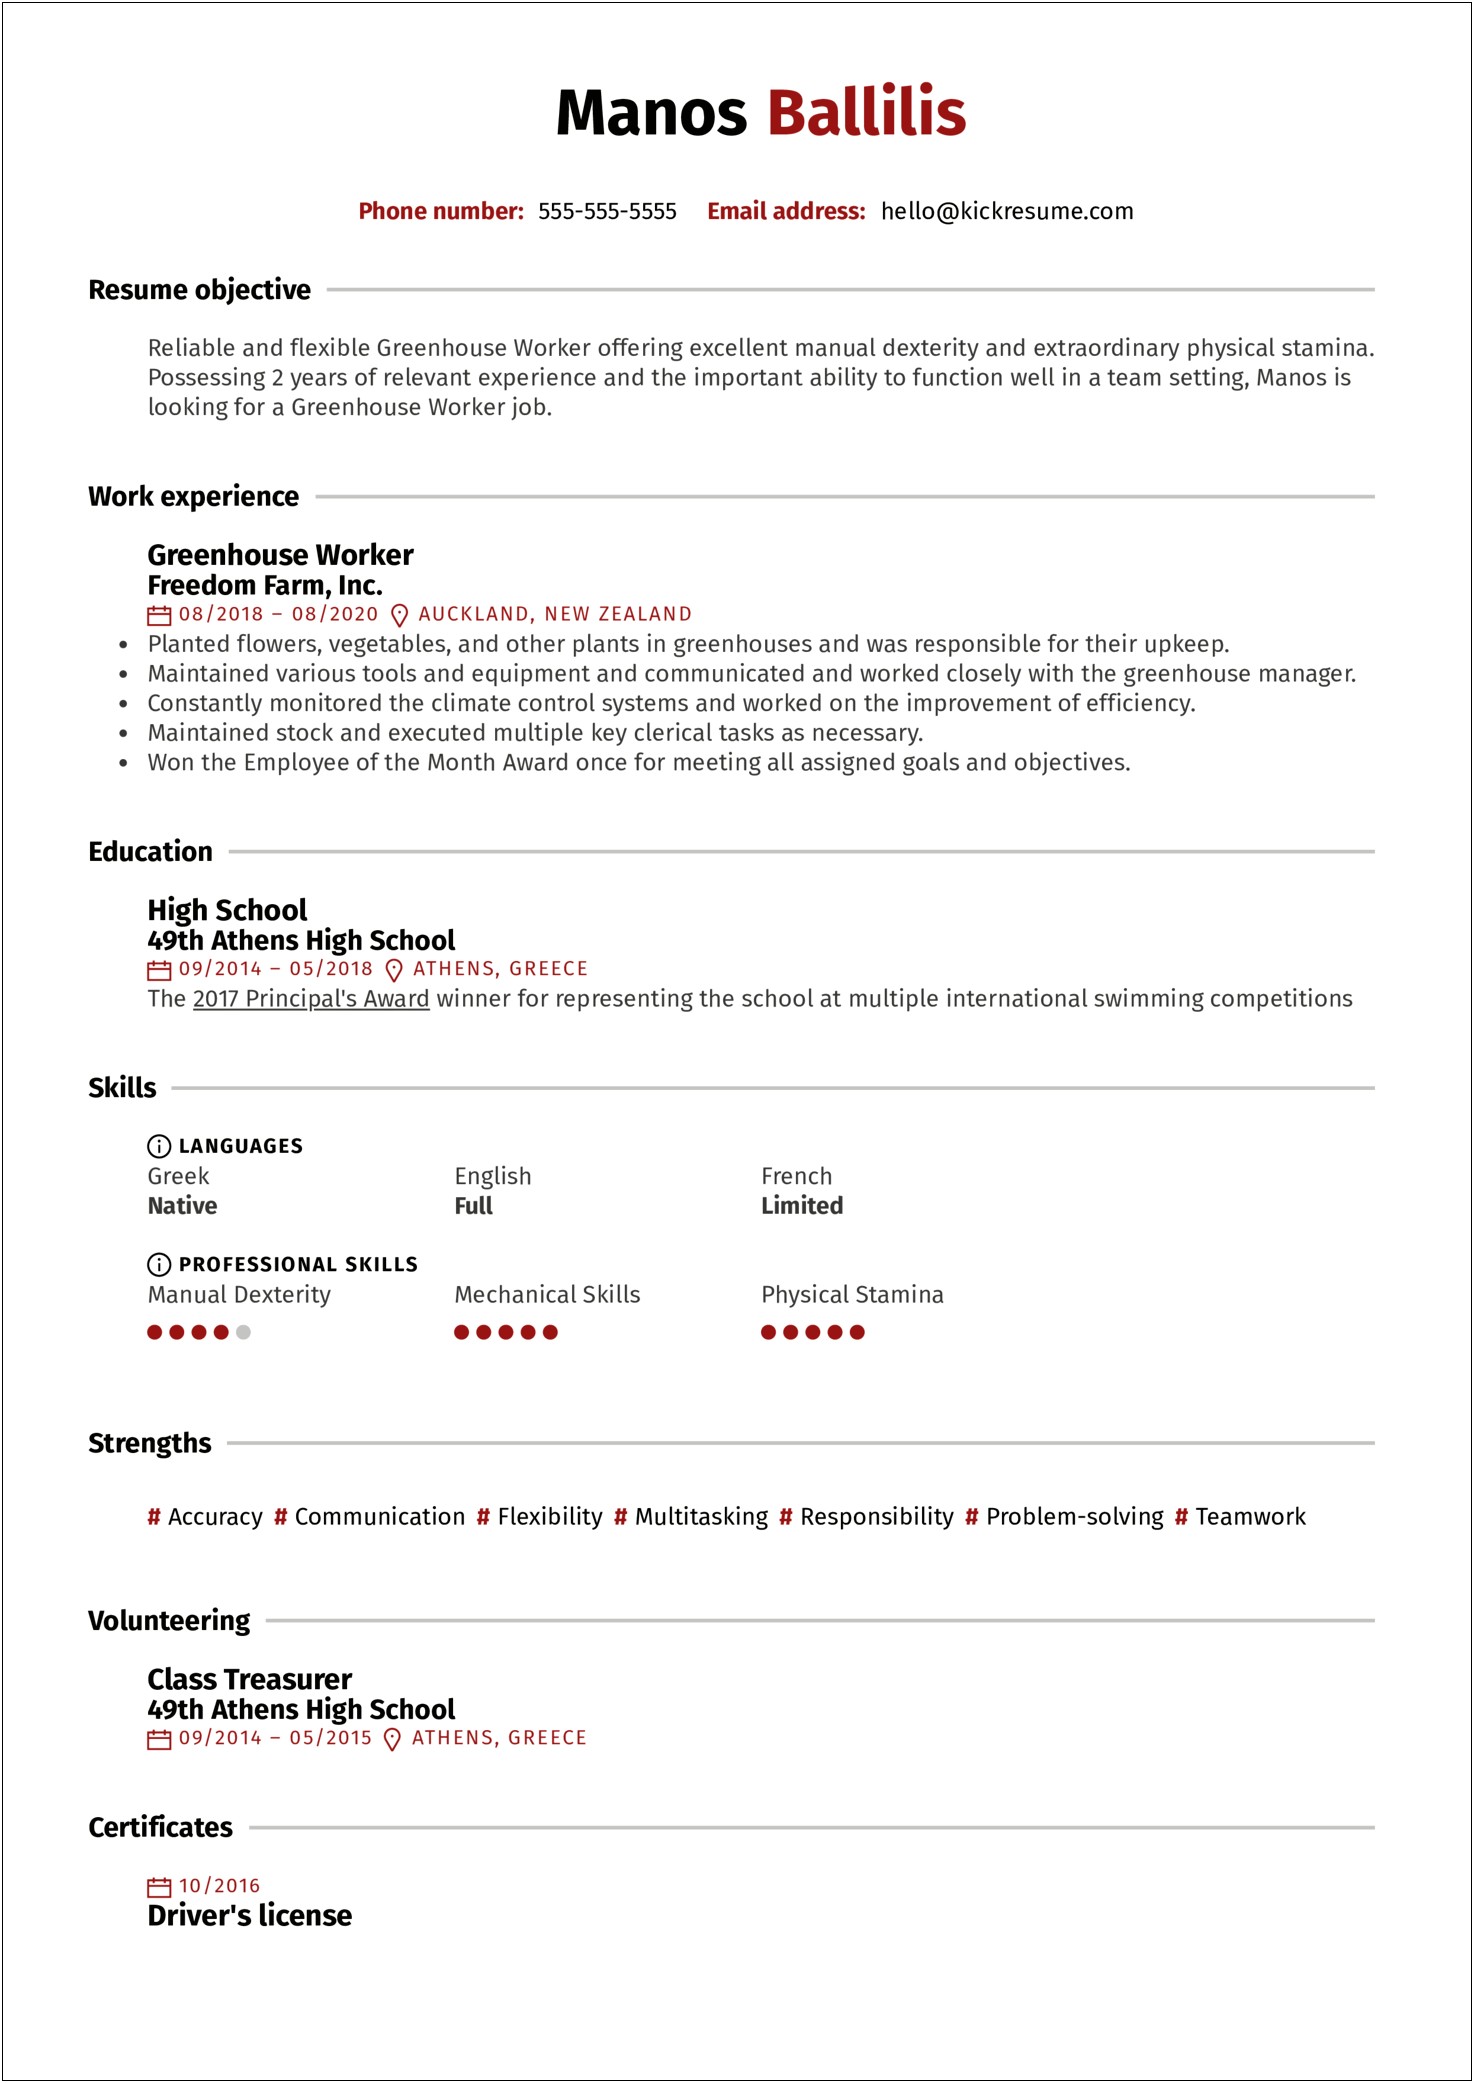 Sample Of Hands On Farming Resume